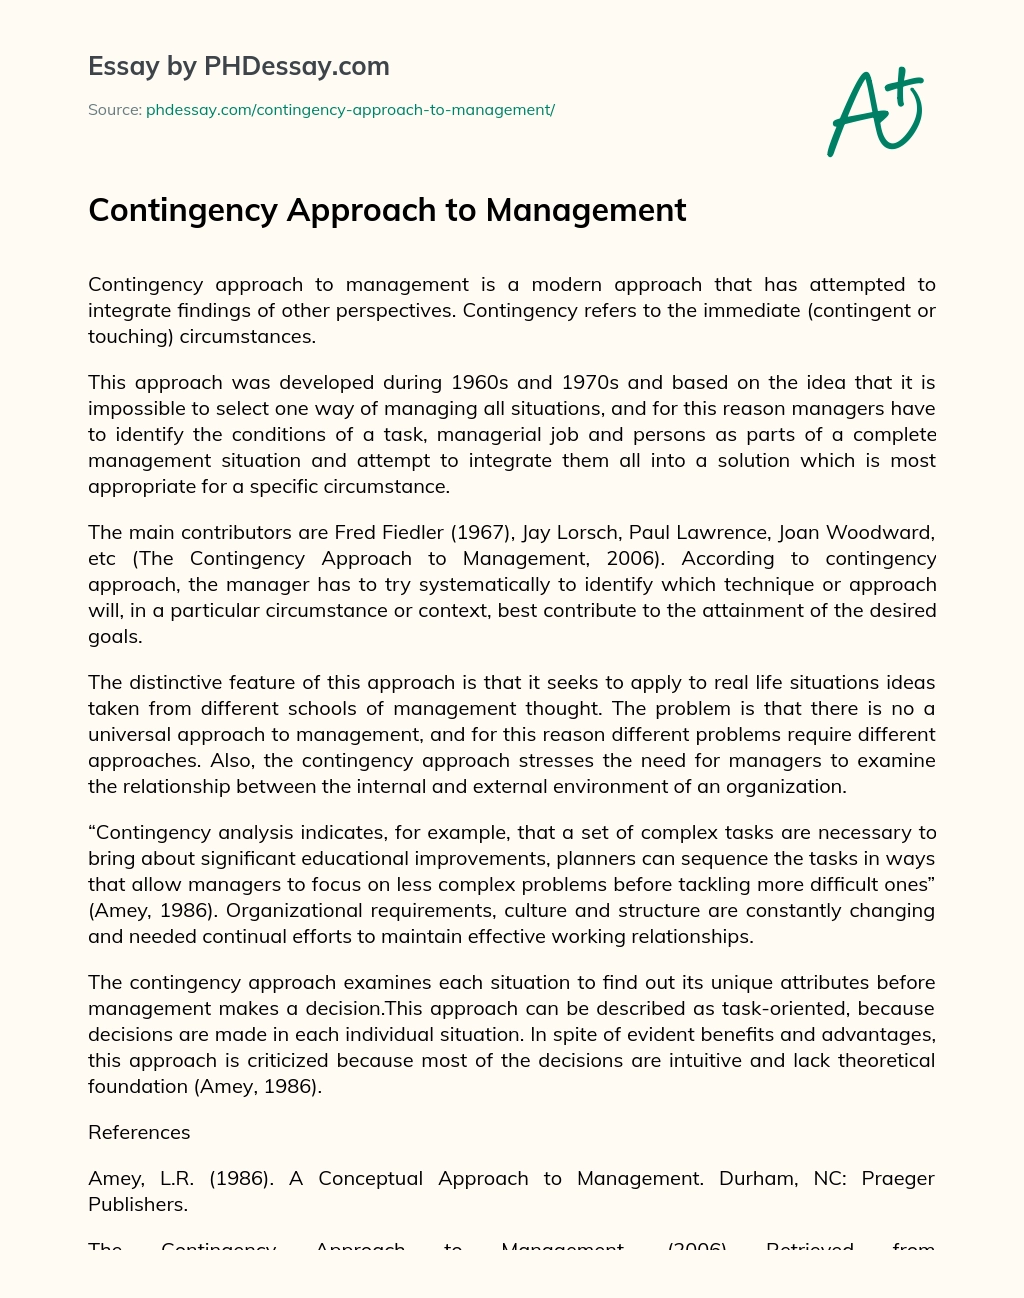 Contingency Approach to Management essay